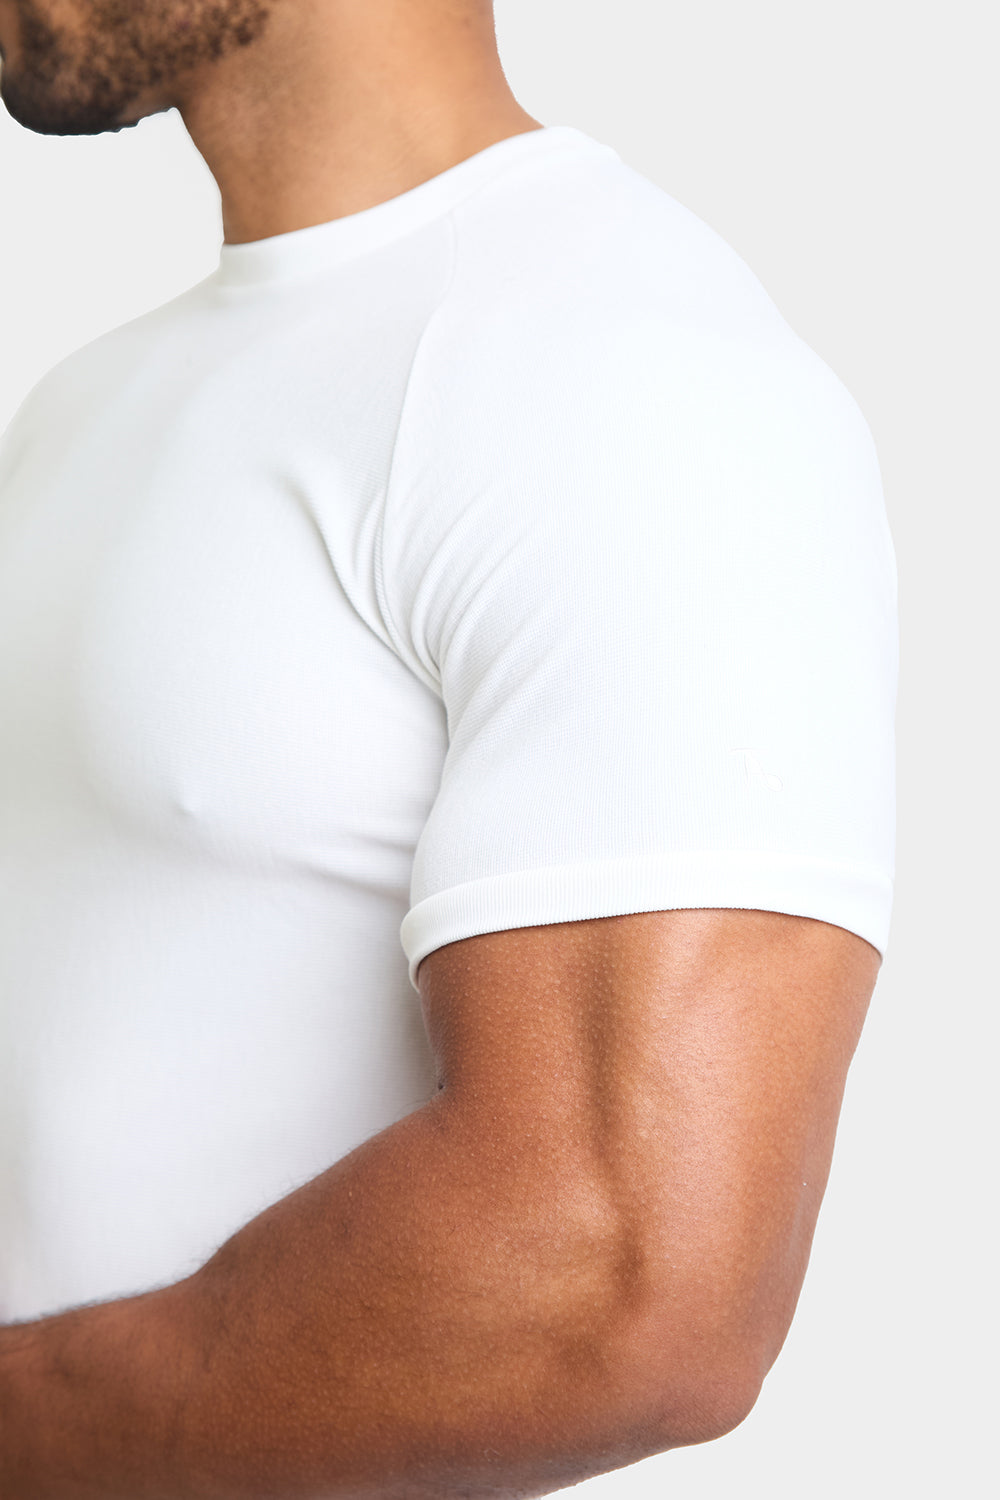 Textured Fashion T-Shirt in White - TAILORED ATHLETE - ROW